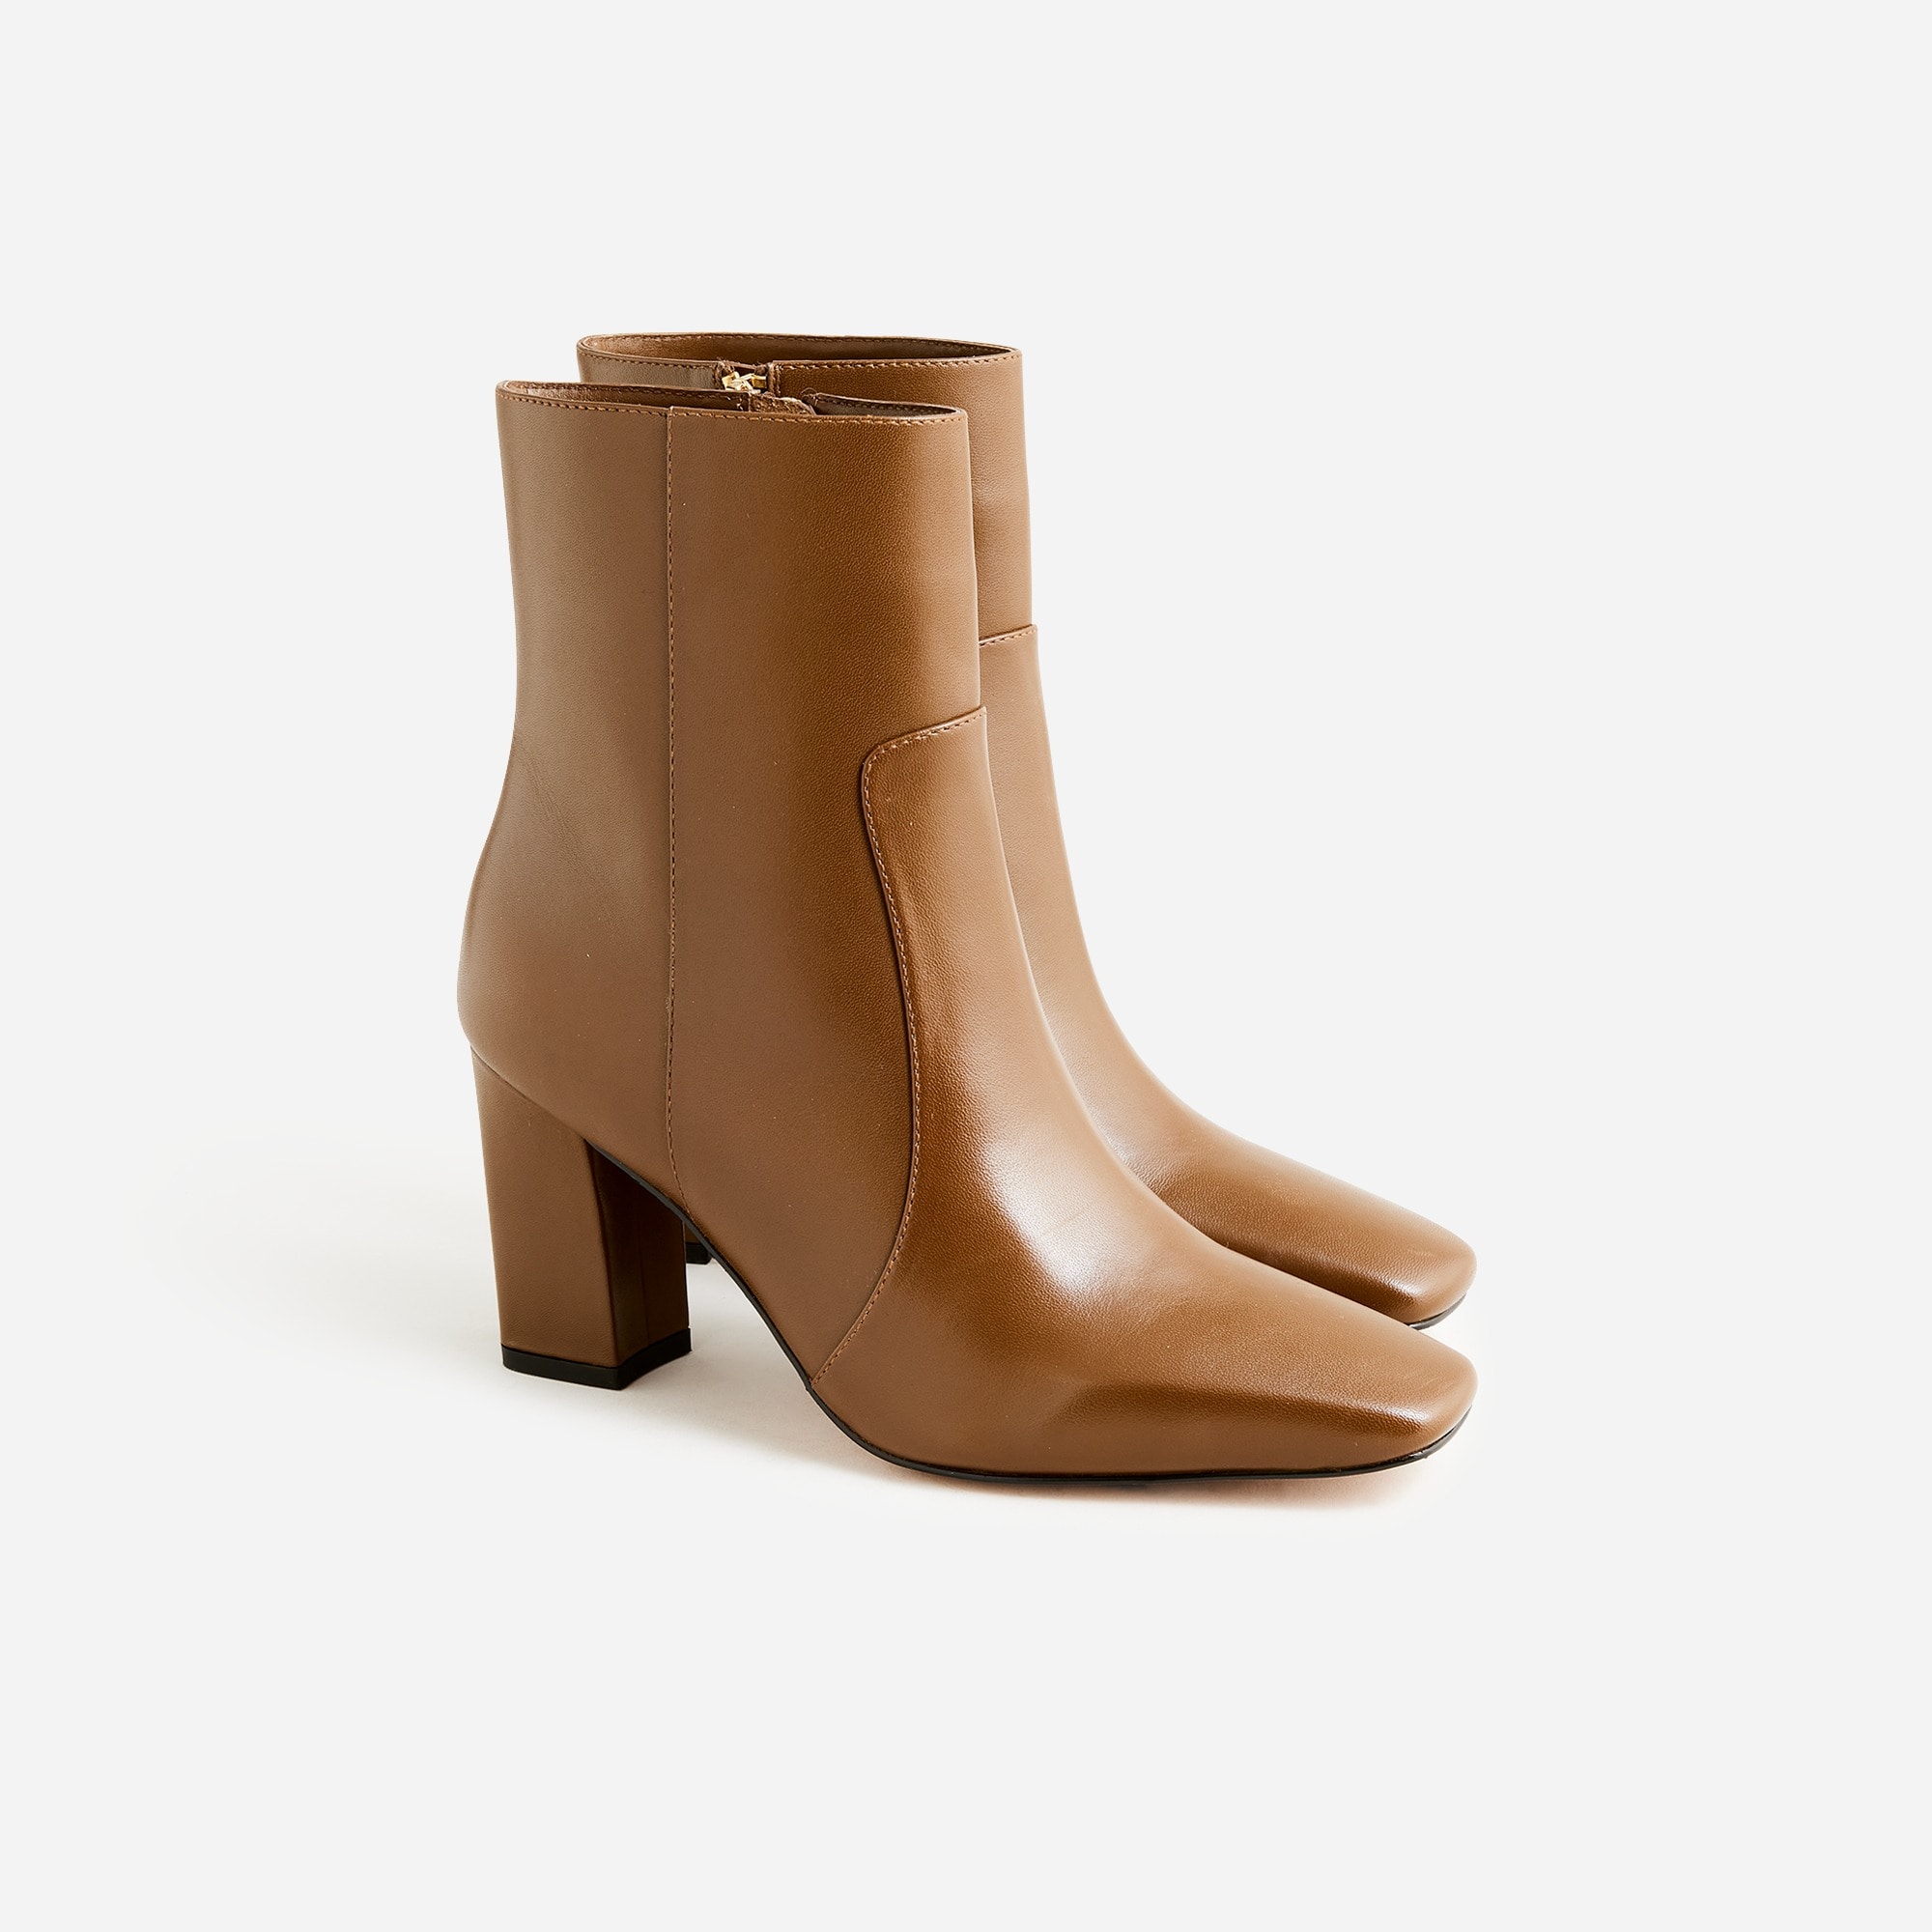  Almond-toe ankle boots in leather